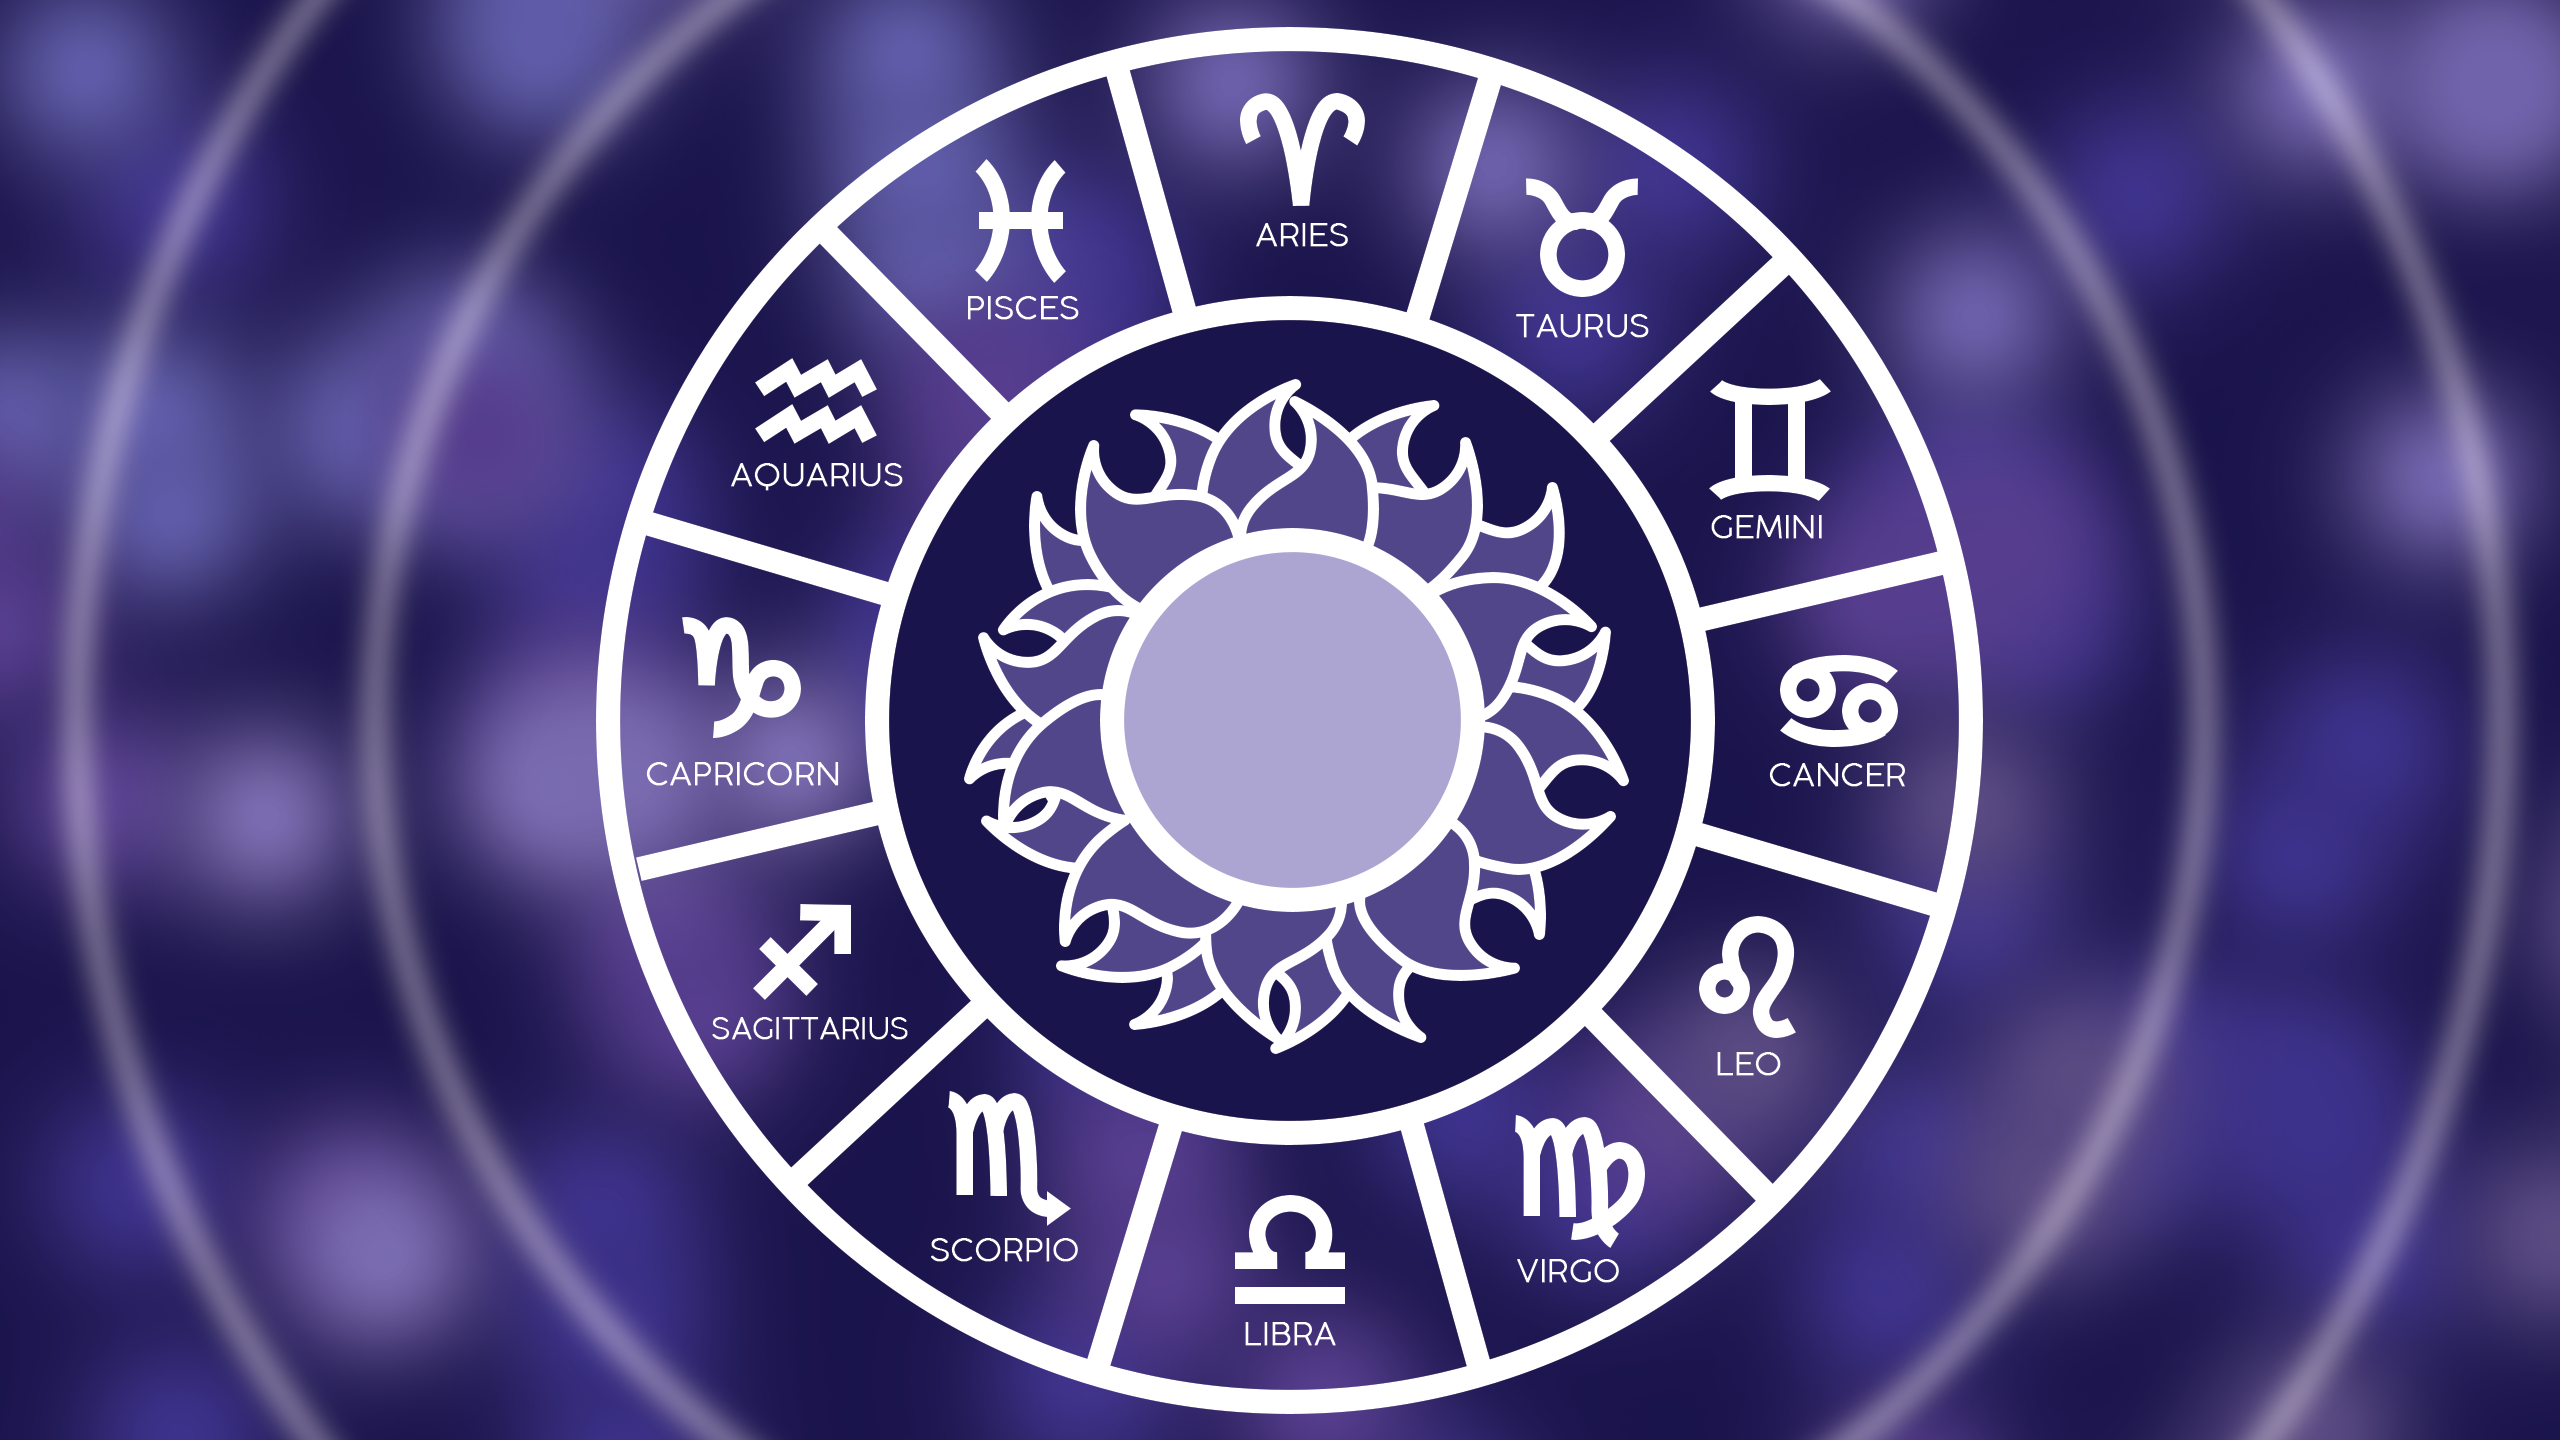 Illustrated with the 12 different zodiac symbols